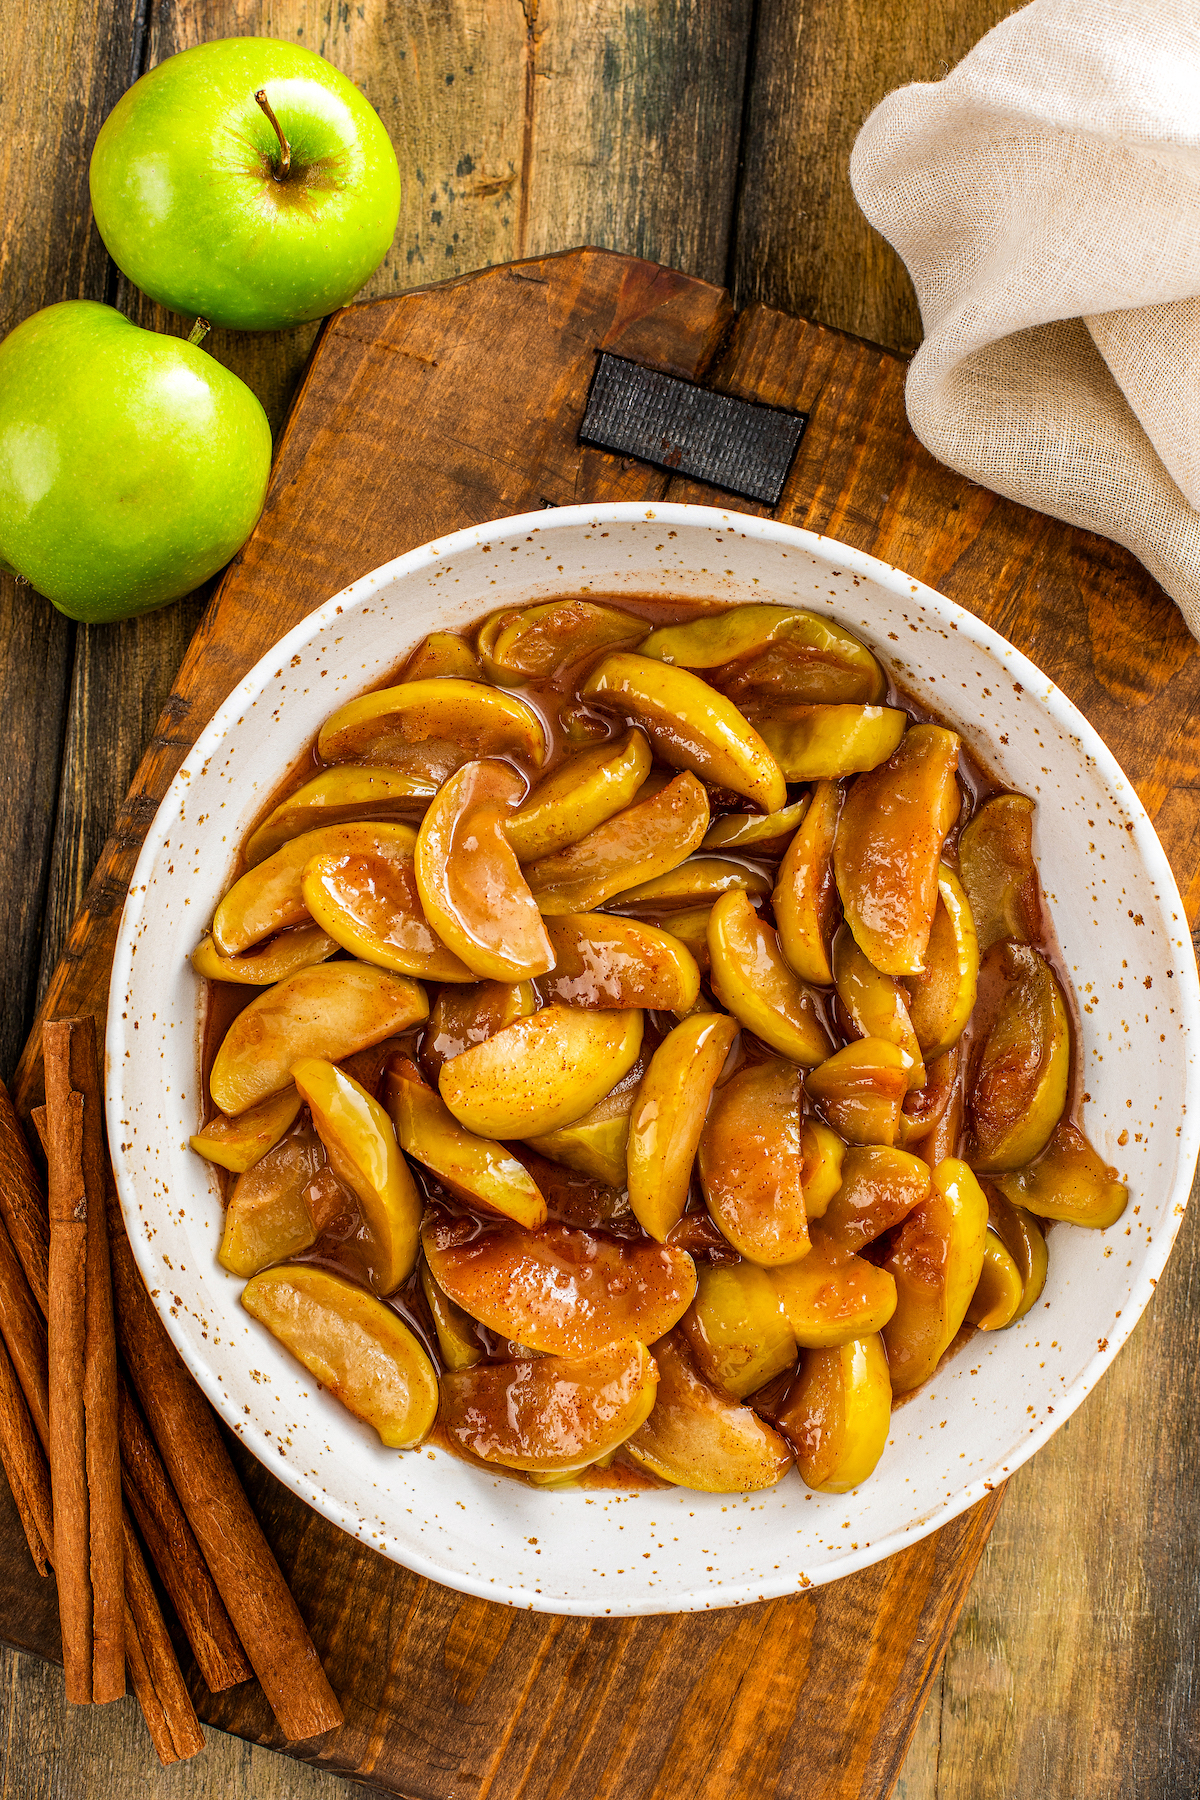 Overhead view of a bowl of fried apples with cinnamon sticks and two green apples on the side of the bowl.